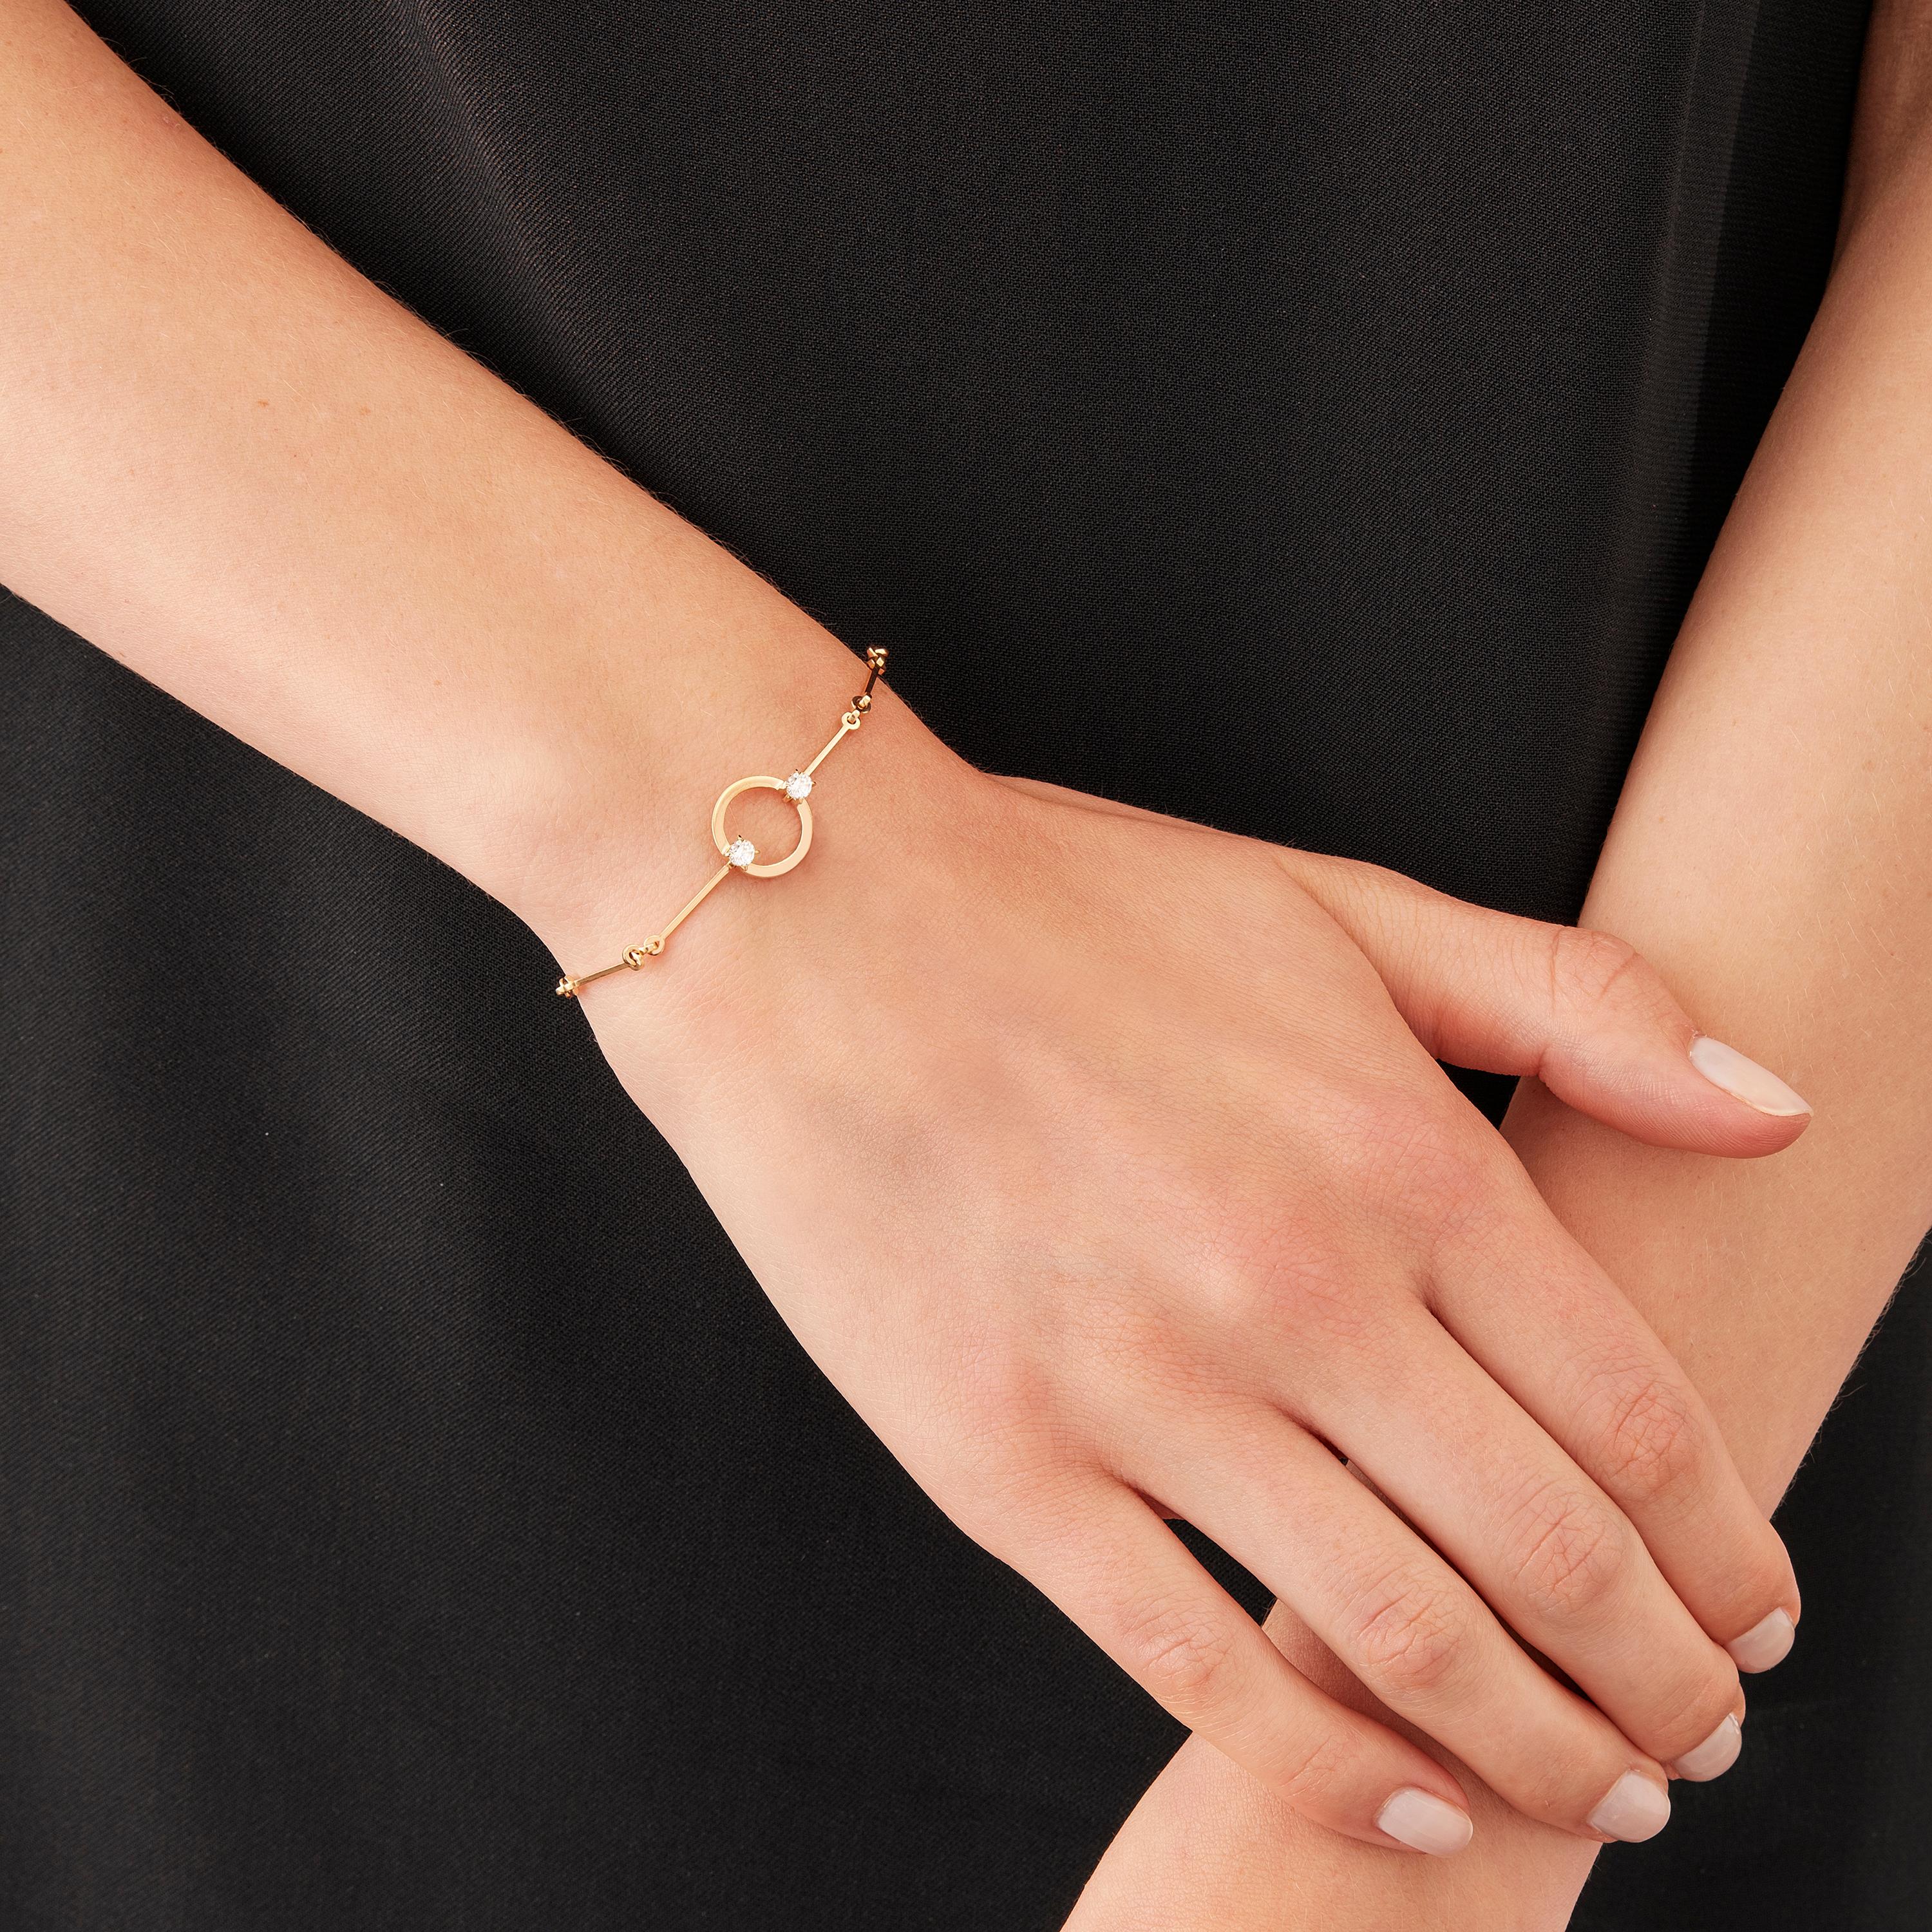 Made by hand in the Milanese atelier of Nathalie Jean, the limited edition Hoi An Drop Bracelet is a graceful composition of articulated rings and bar links in rosé gold, a warm, sophisticated color close to yellow gold. Miniature articulations are